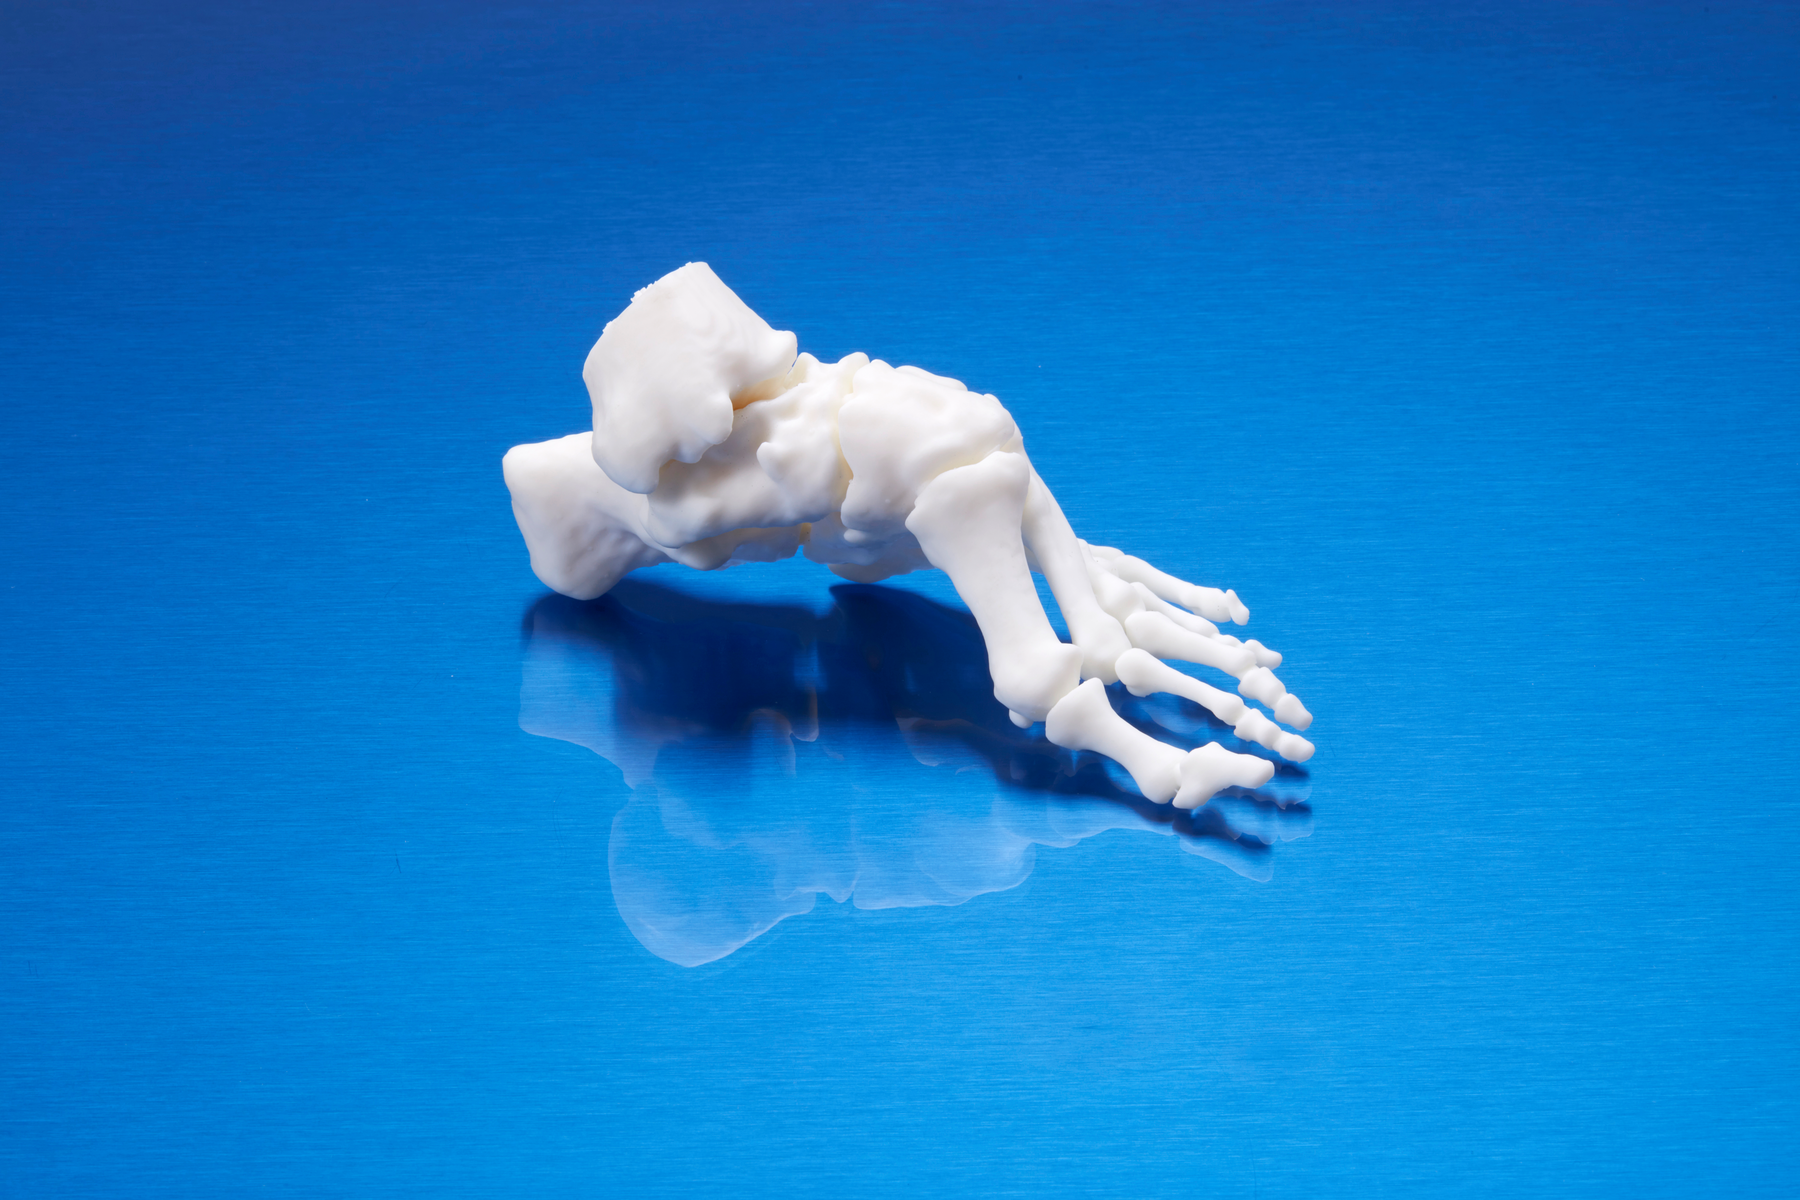 White resin printed product. Shop additive manufacturing printers, resins and accessories | eacadditive.com.